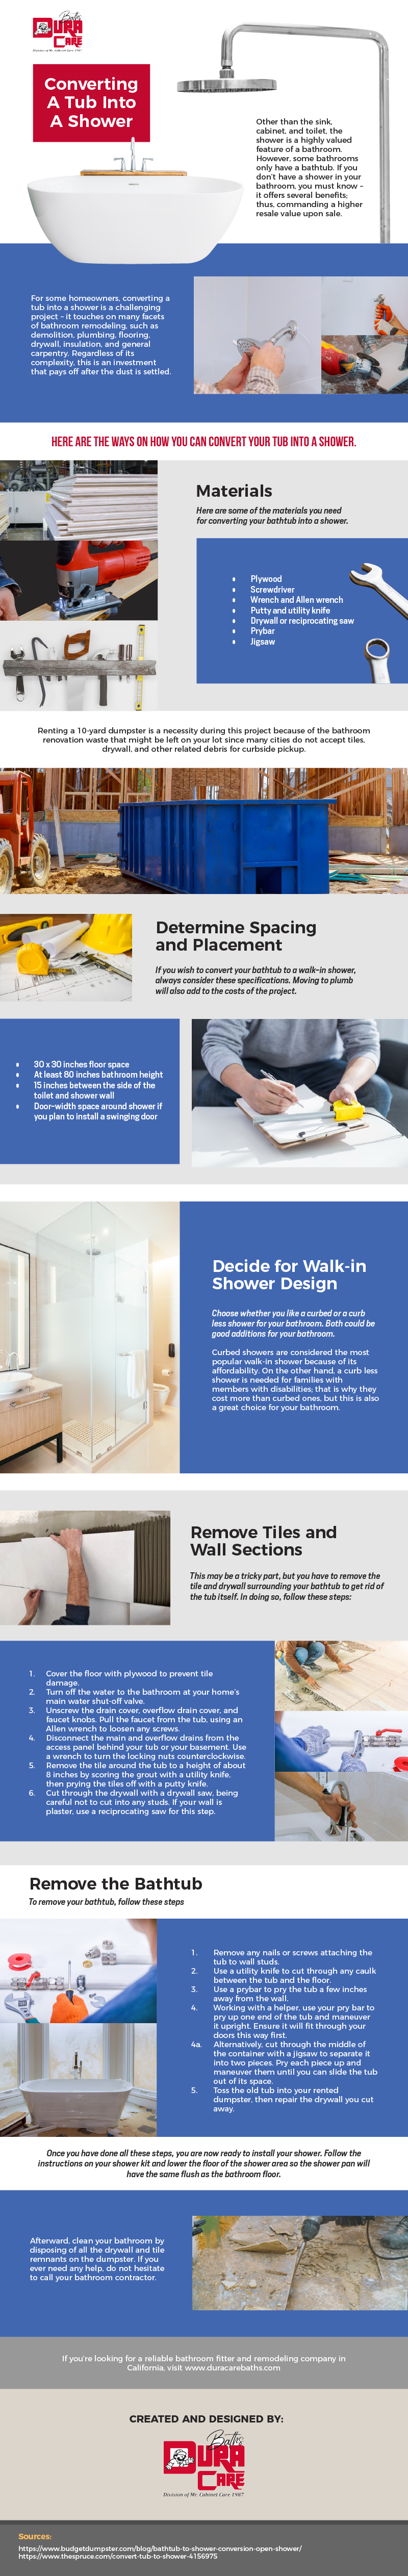 Converting A Tub Into A Shower-01 infographic